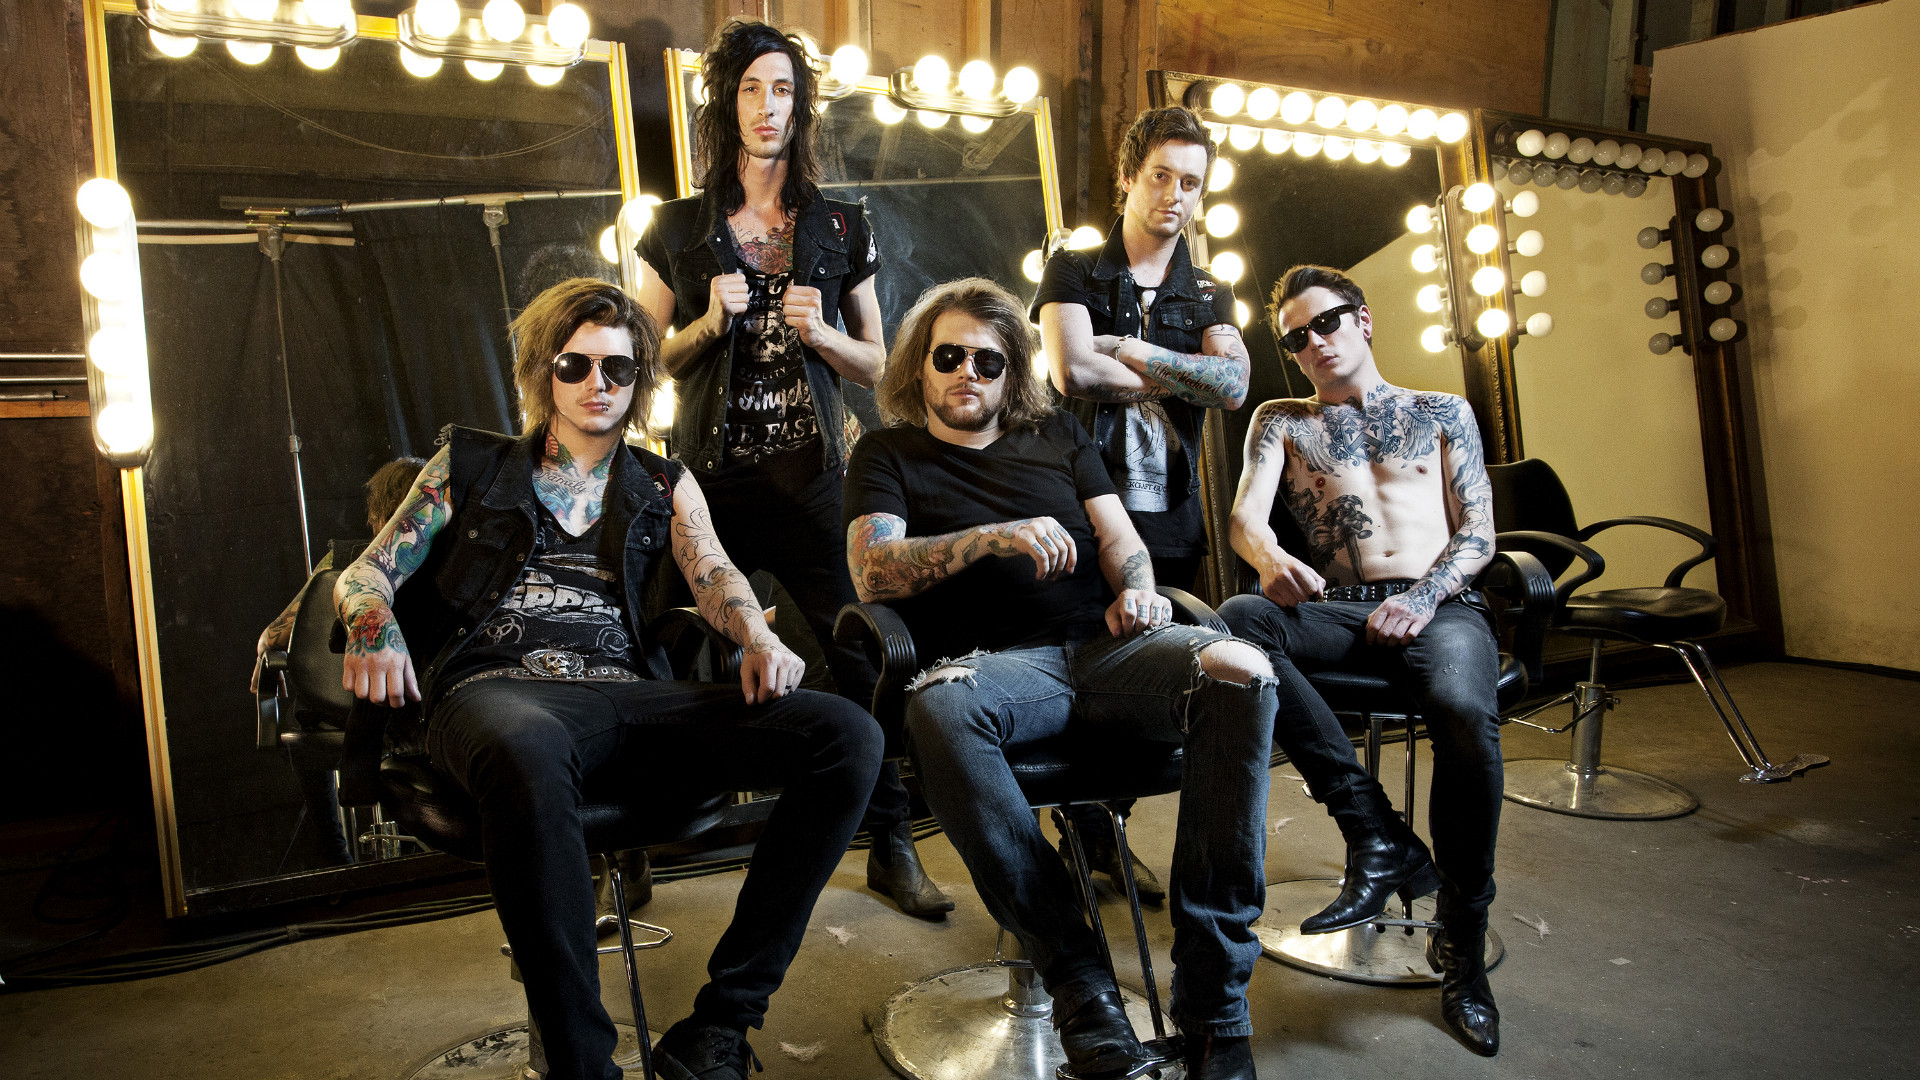 1920x1080 Asking Alexandria Bassist Experiences Near Miss In Serious Truck Accident